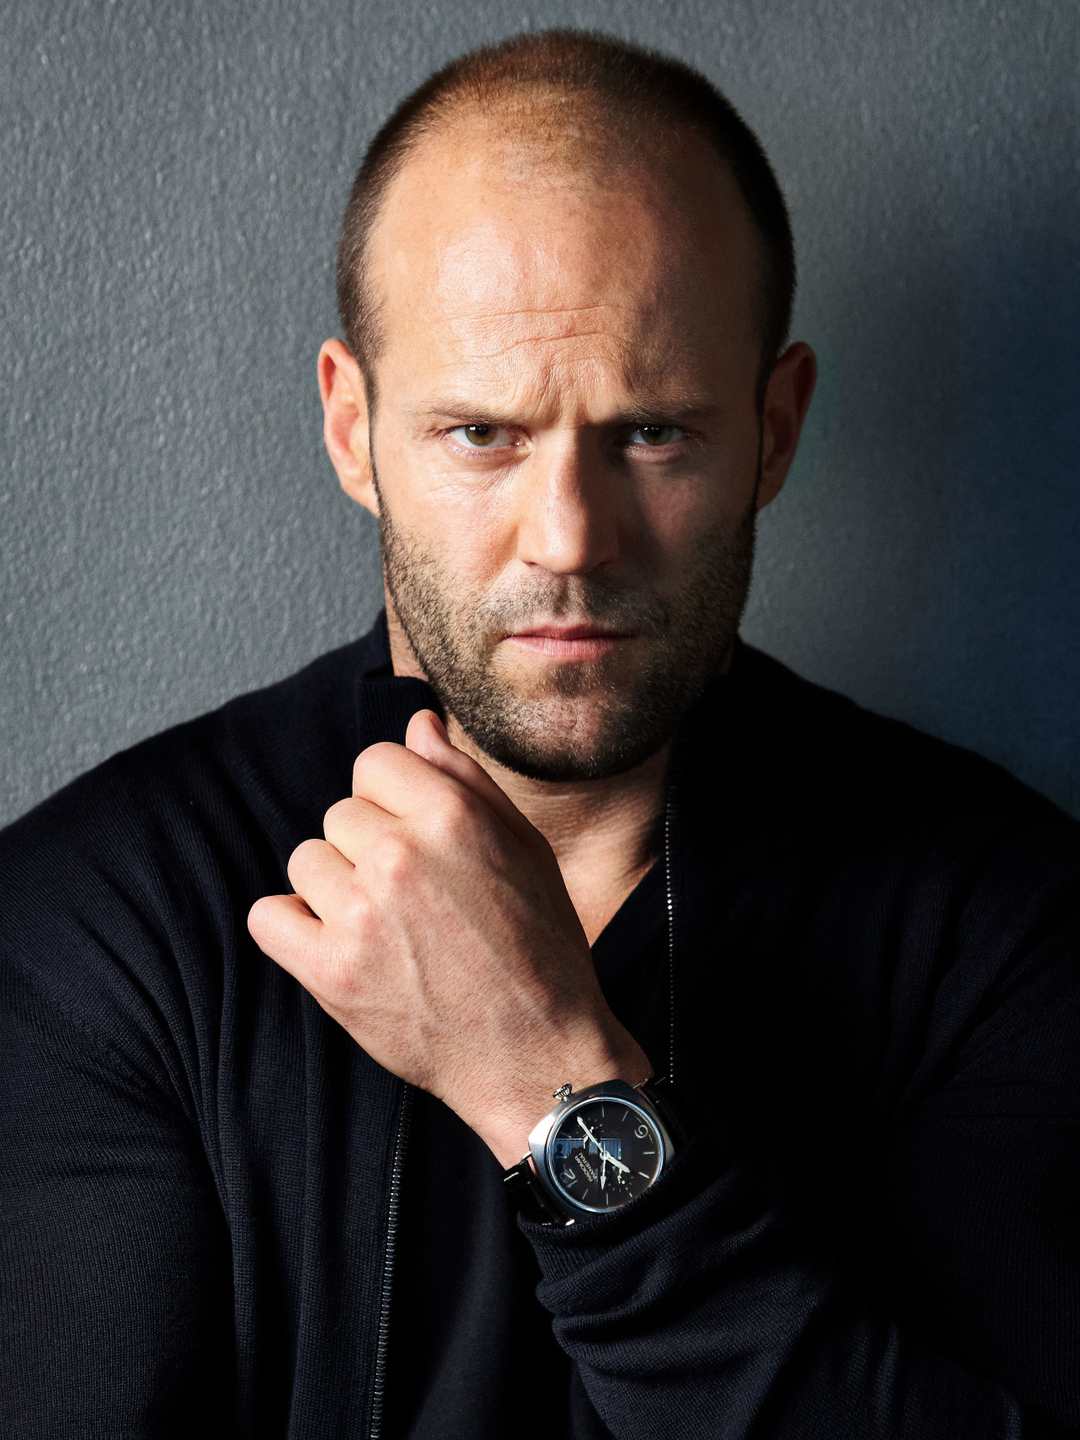 Jason Statham who is his mother